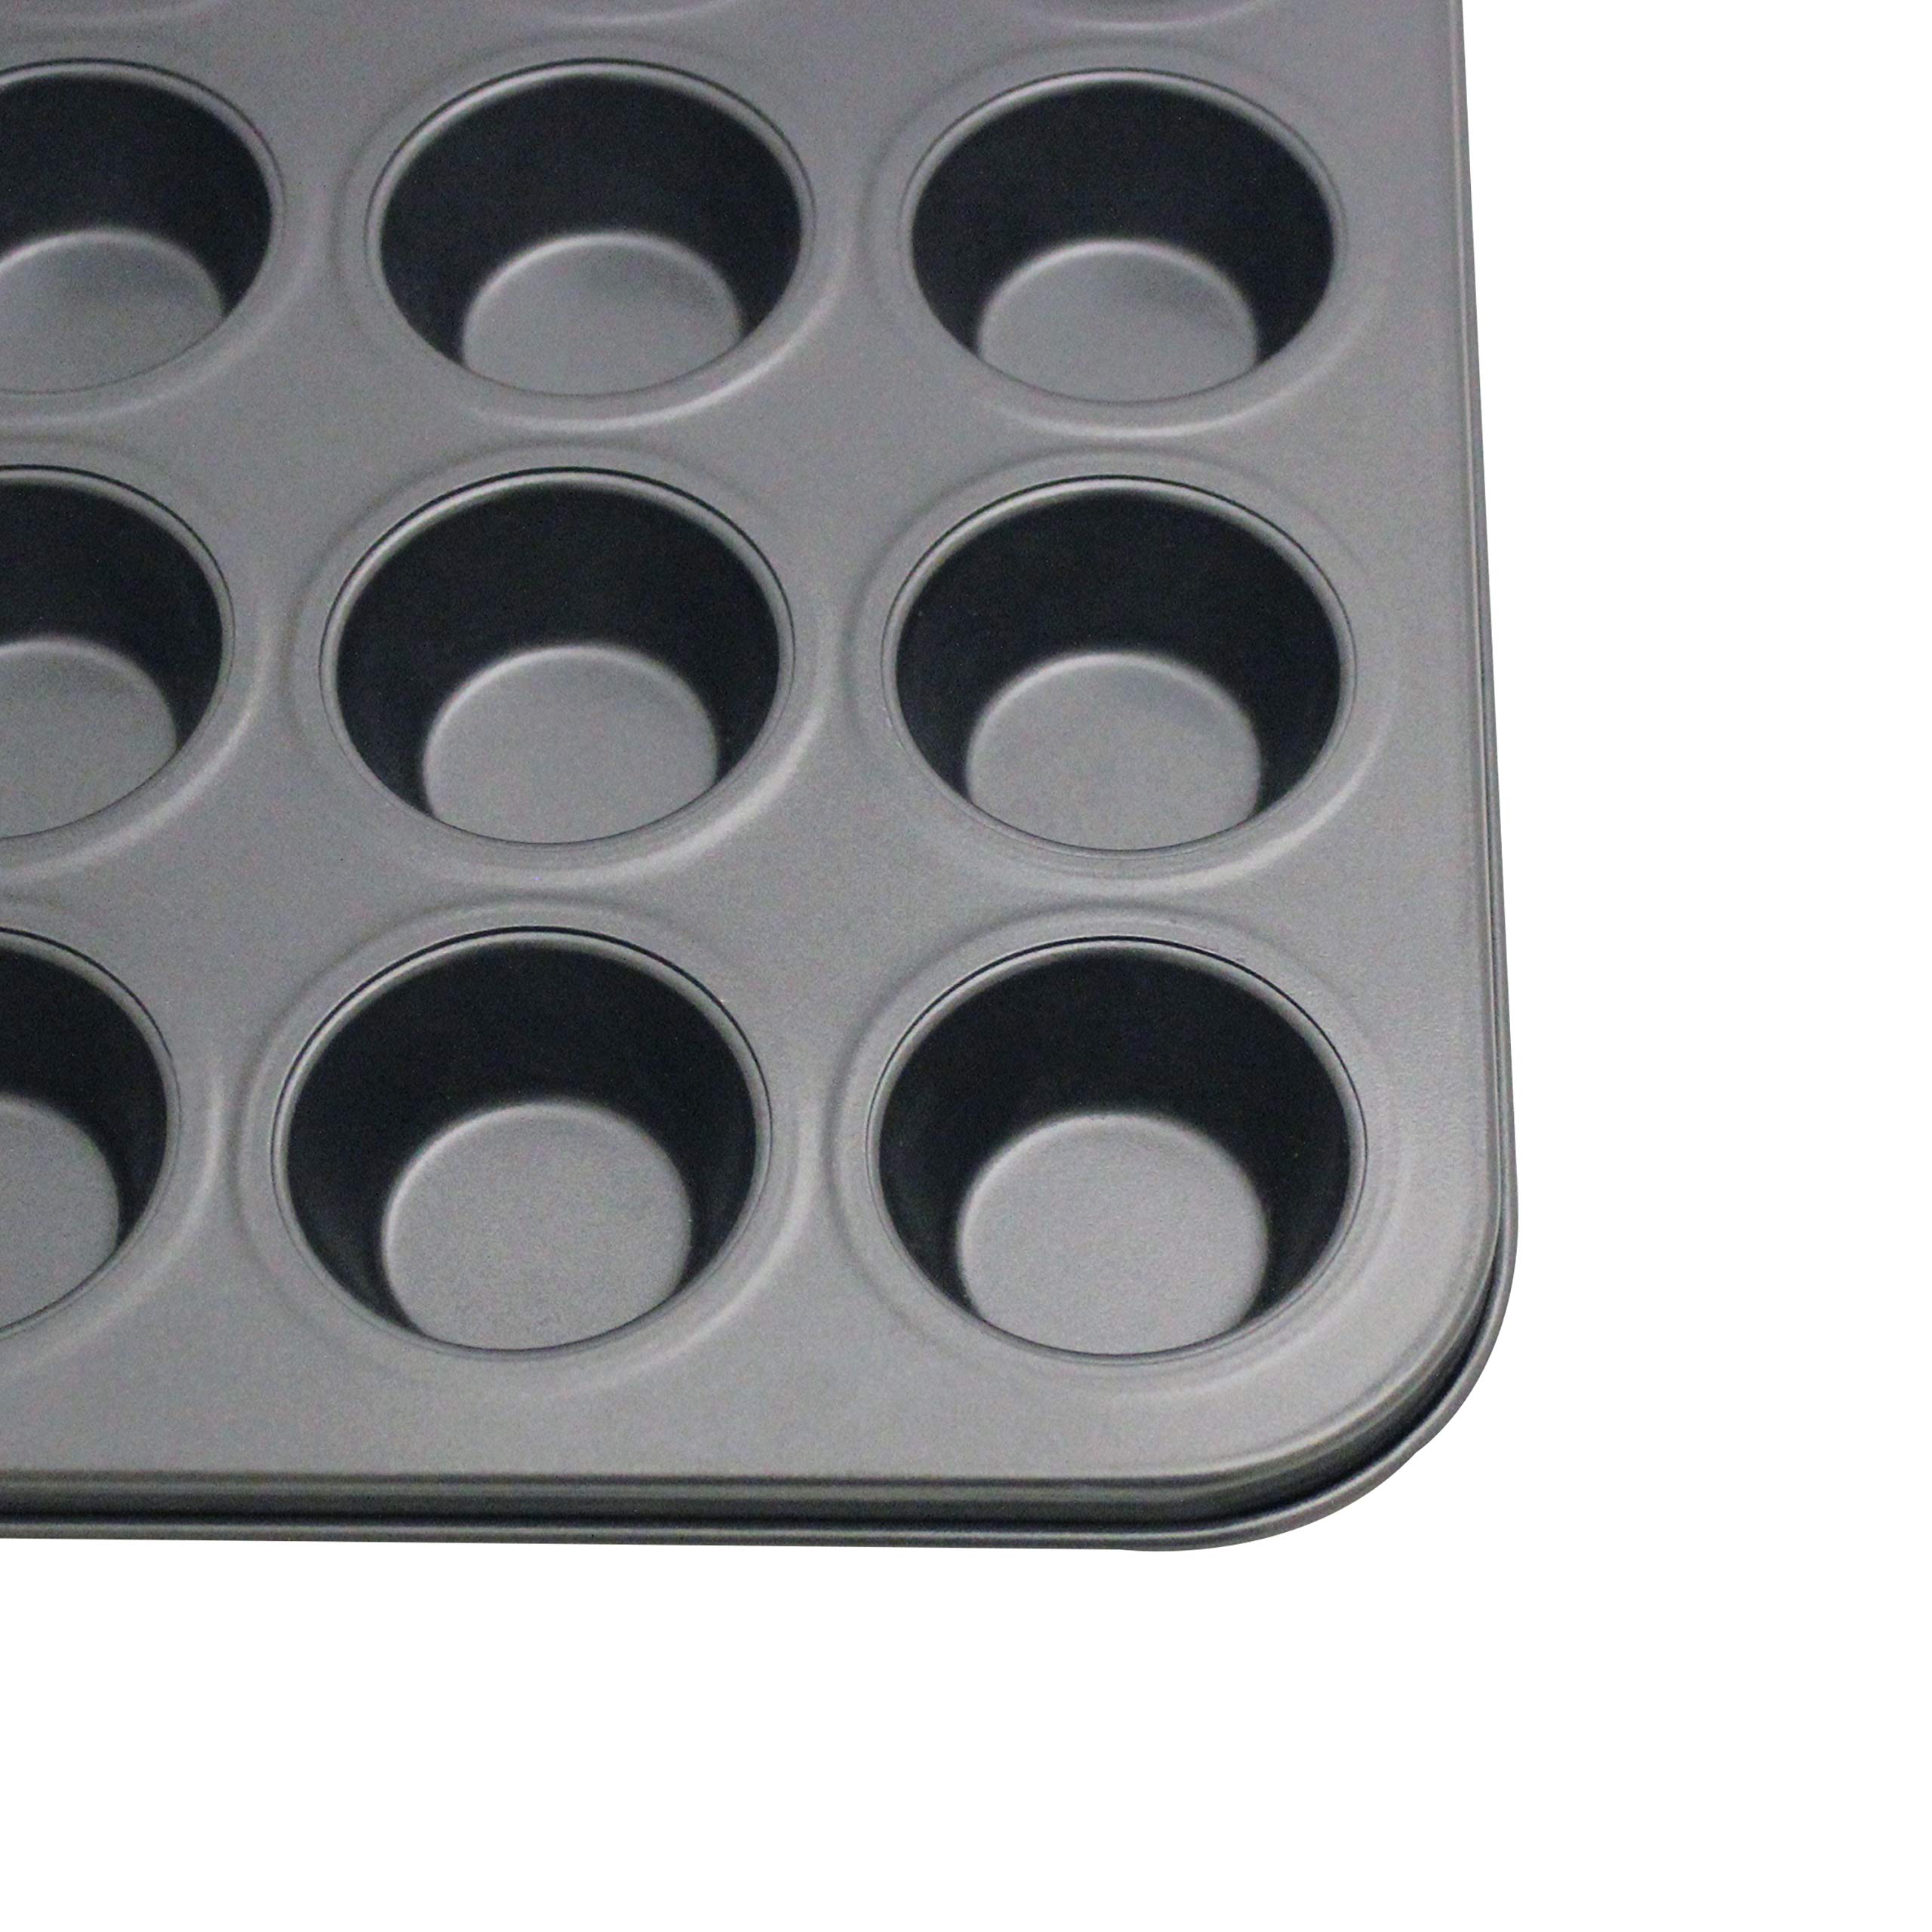 Thunder Group 24 CUP MUFFIN PAN - NON STICK - SMALL CUP